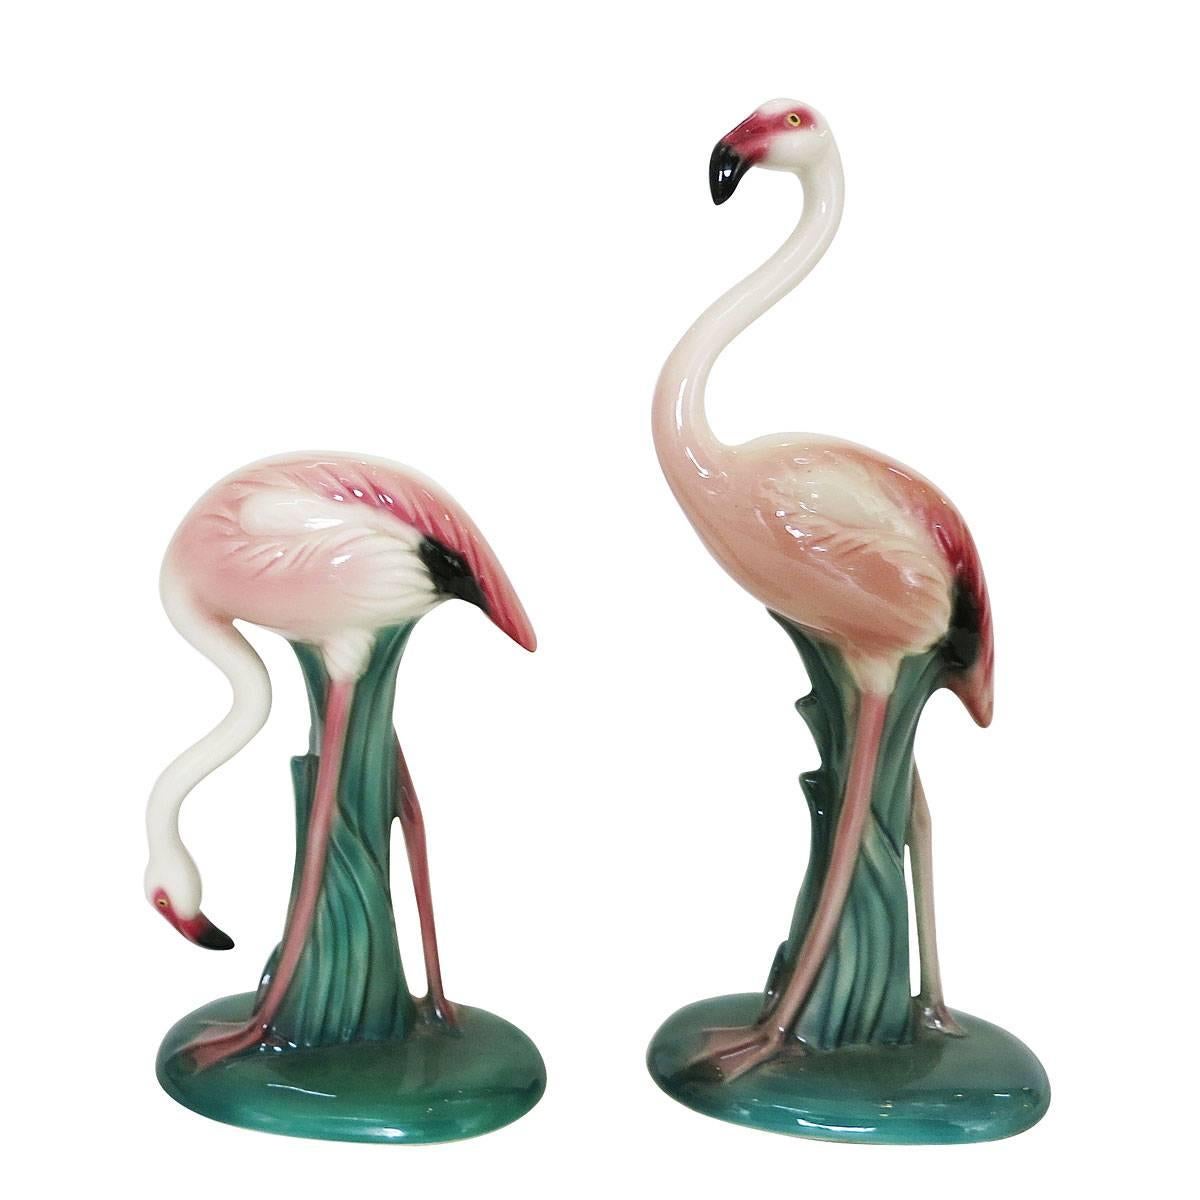 California Pottery Small Flamingo Statue Pair by Will-George